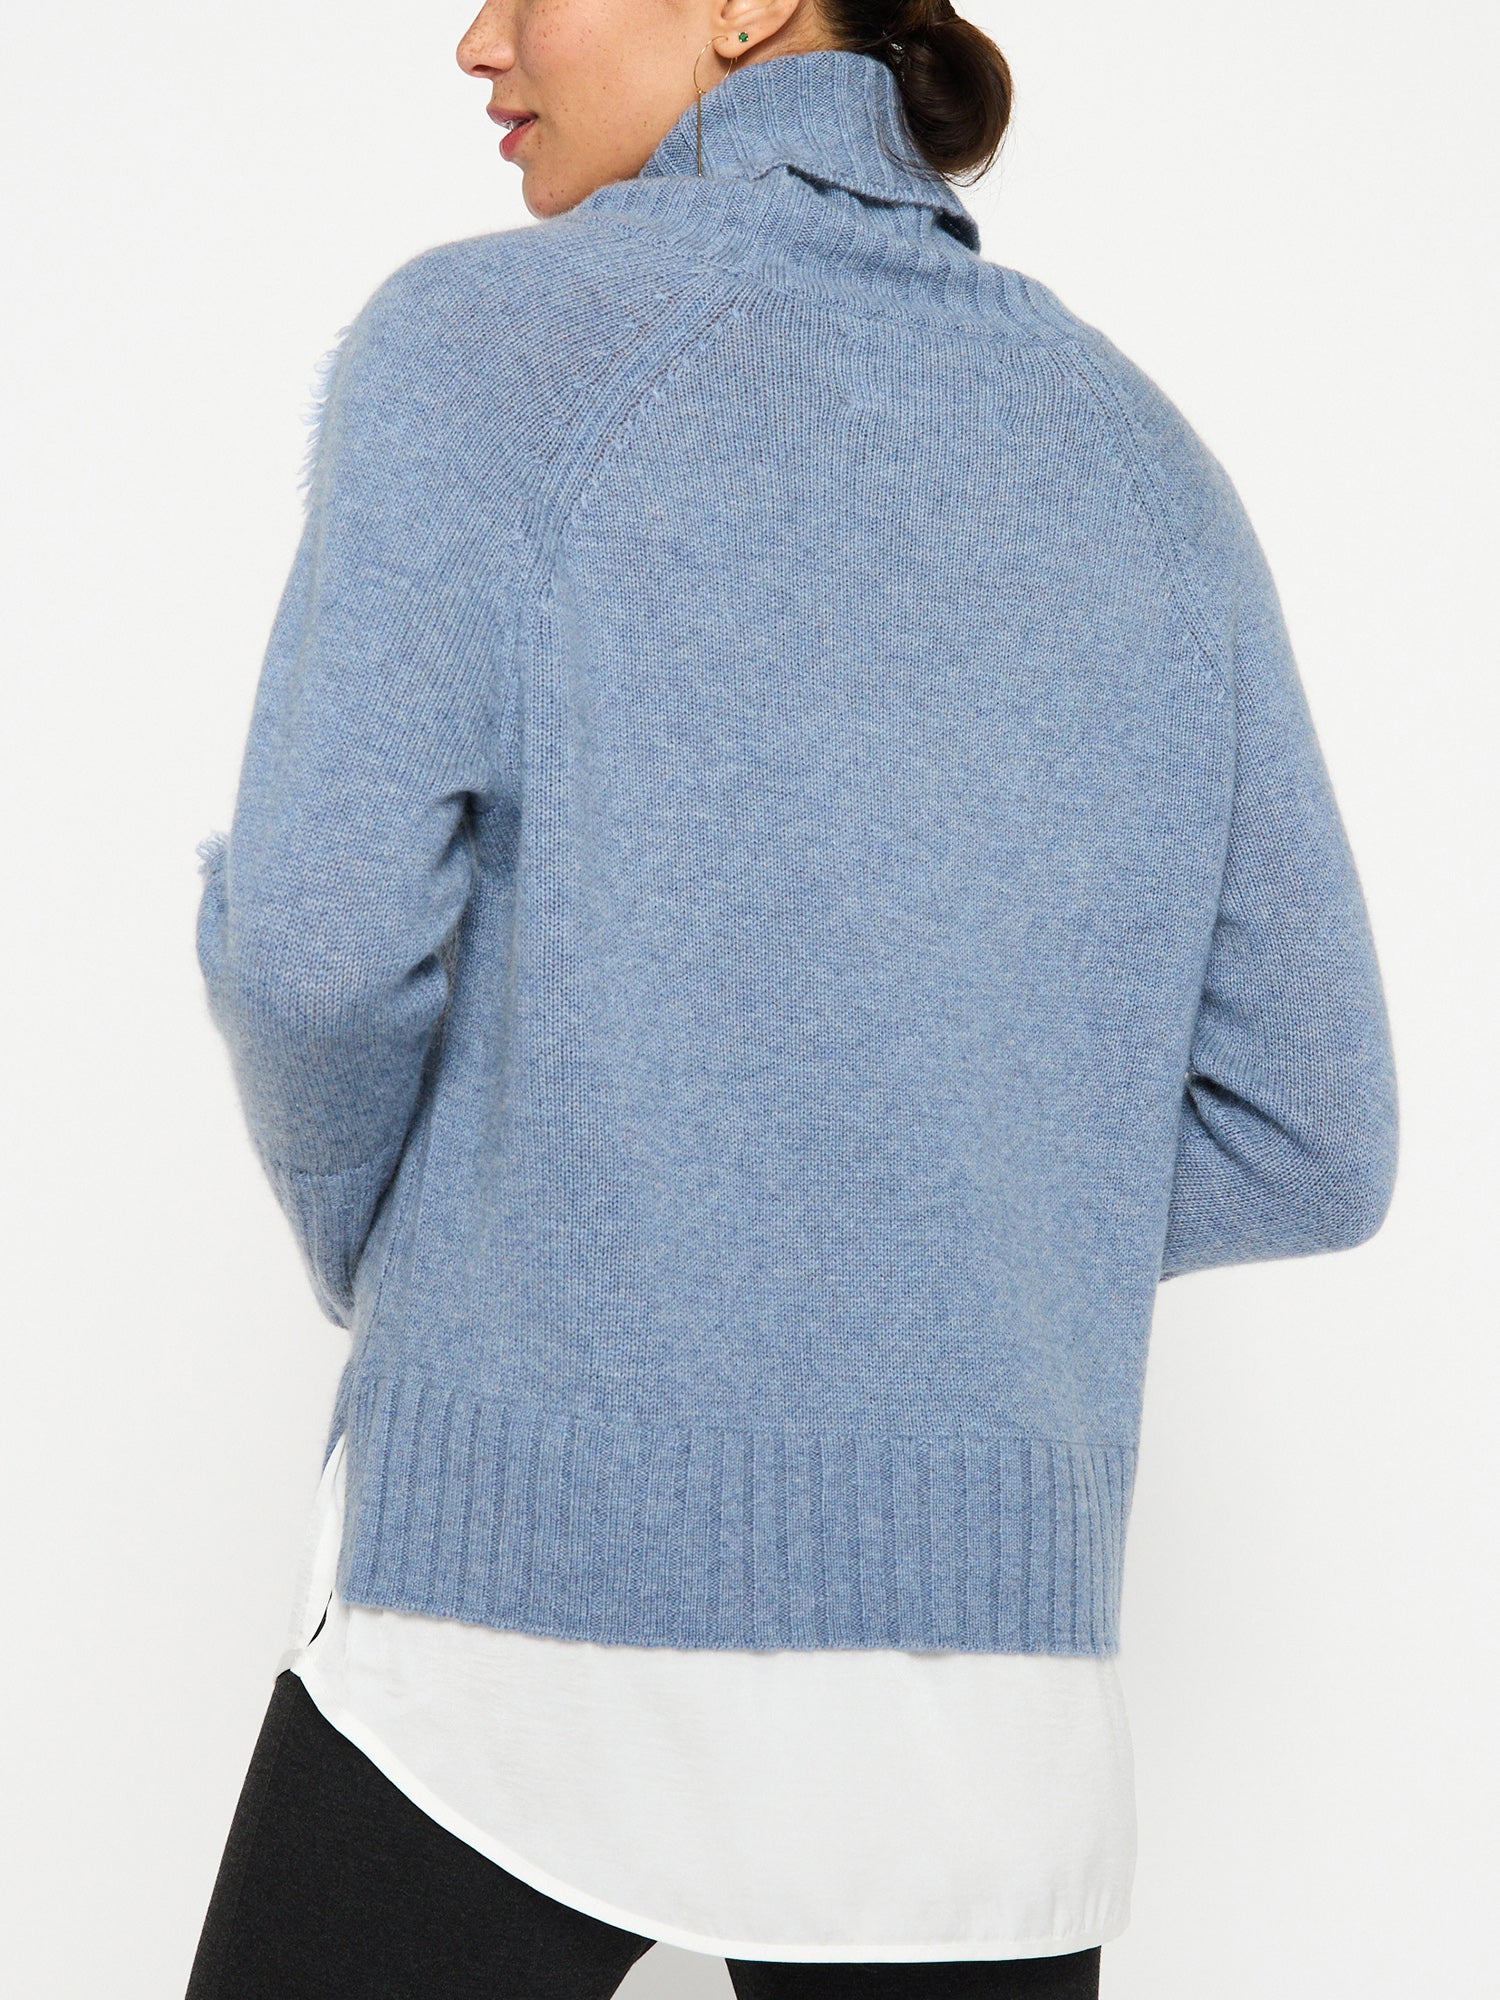 Jolie blue layered turtleneck sweater back view